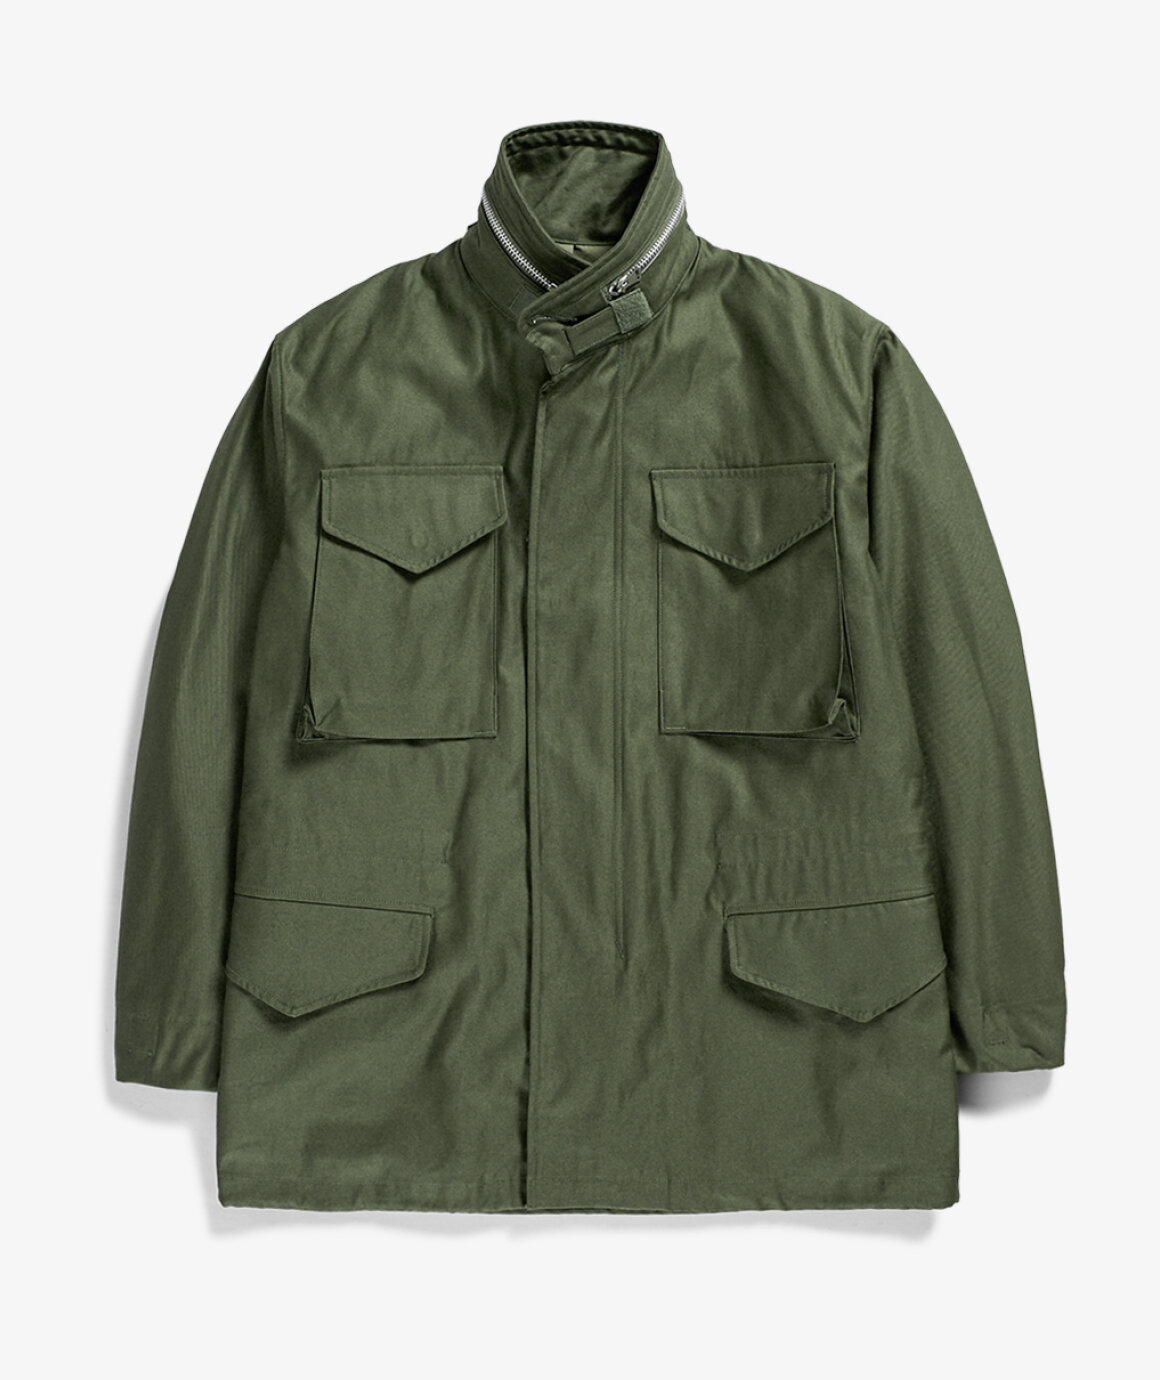 Norse Store | Shipping Worldwide - Orslow M65 Field Jacket - Army green